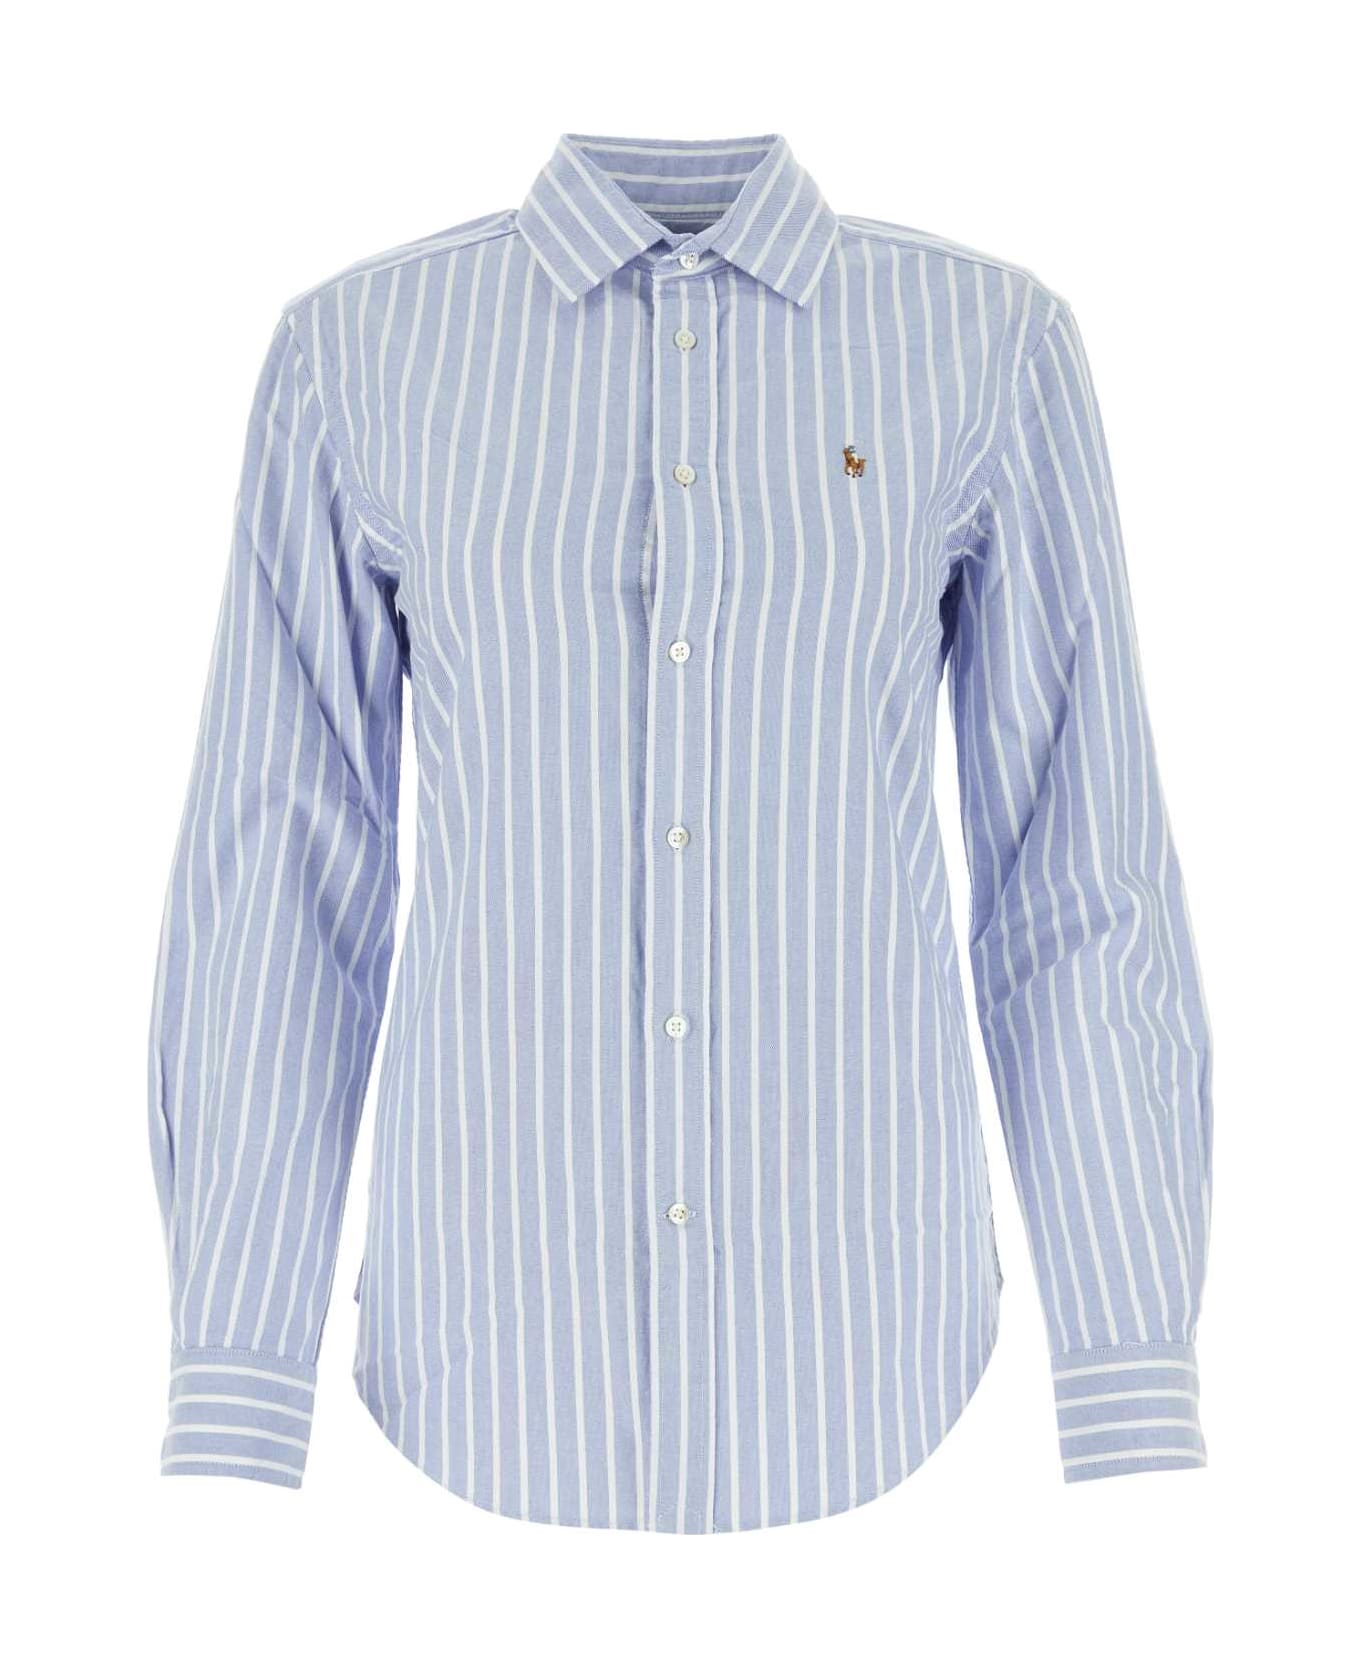 Polo Ralph Lauren Embroidered Oxford Shirt - 004 シャツ